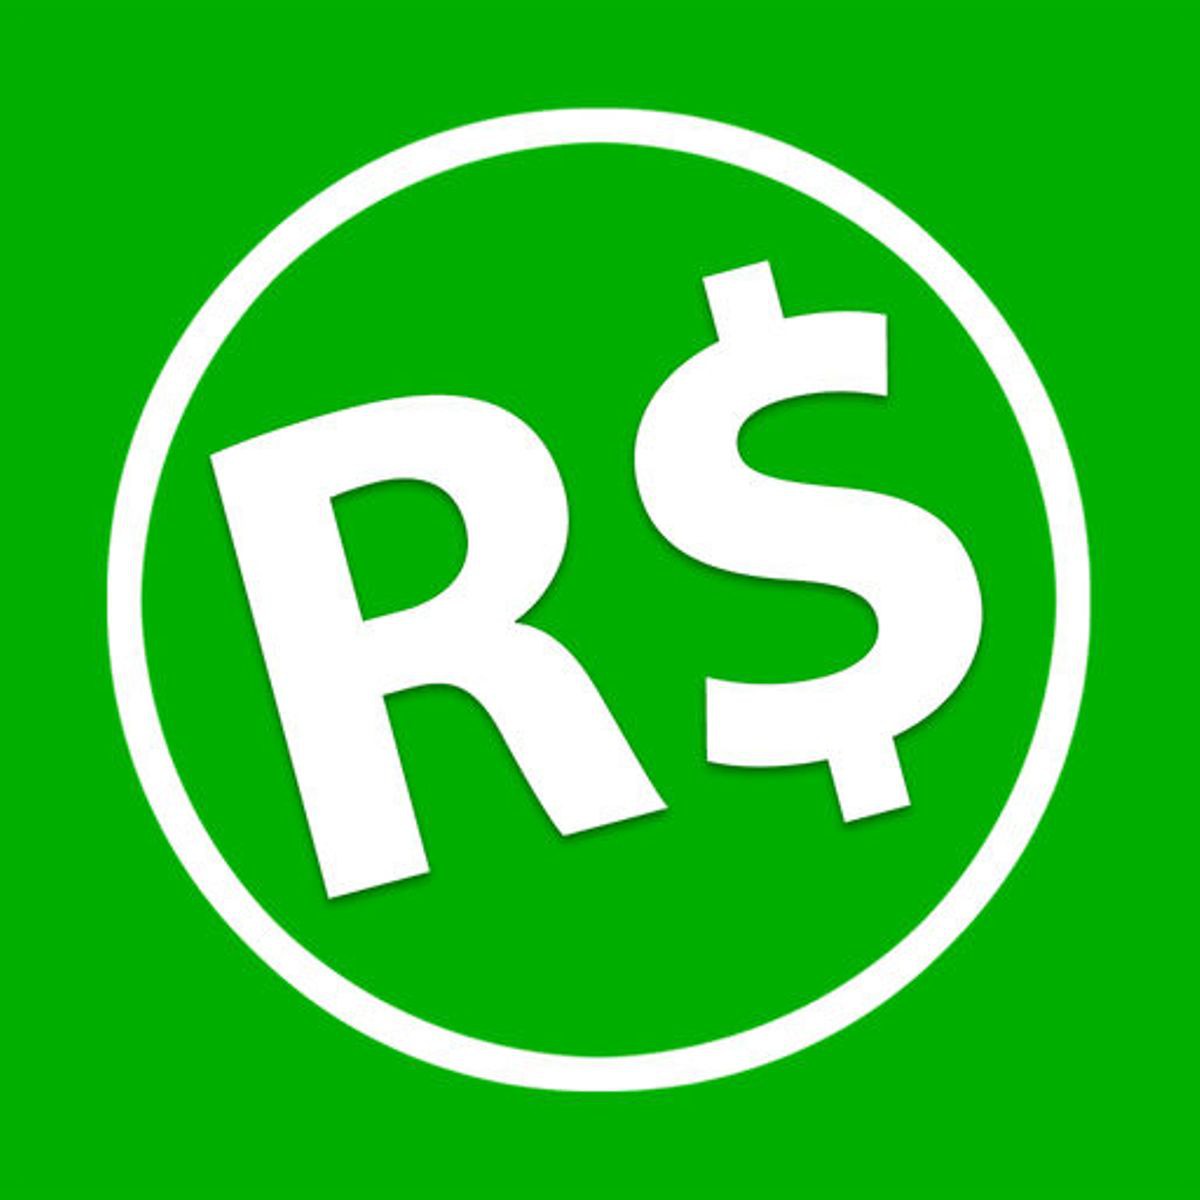 Rbx Robux Rewards - rbxcash com watch videos complete offers withdraw to robux robux